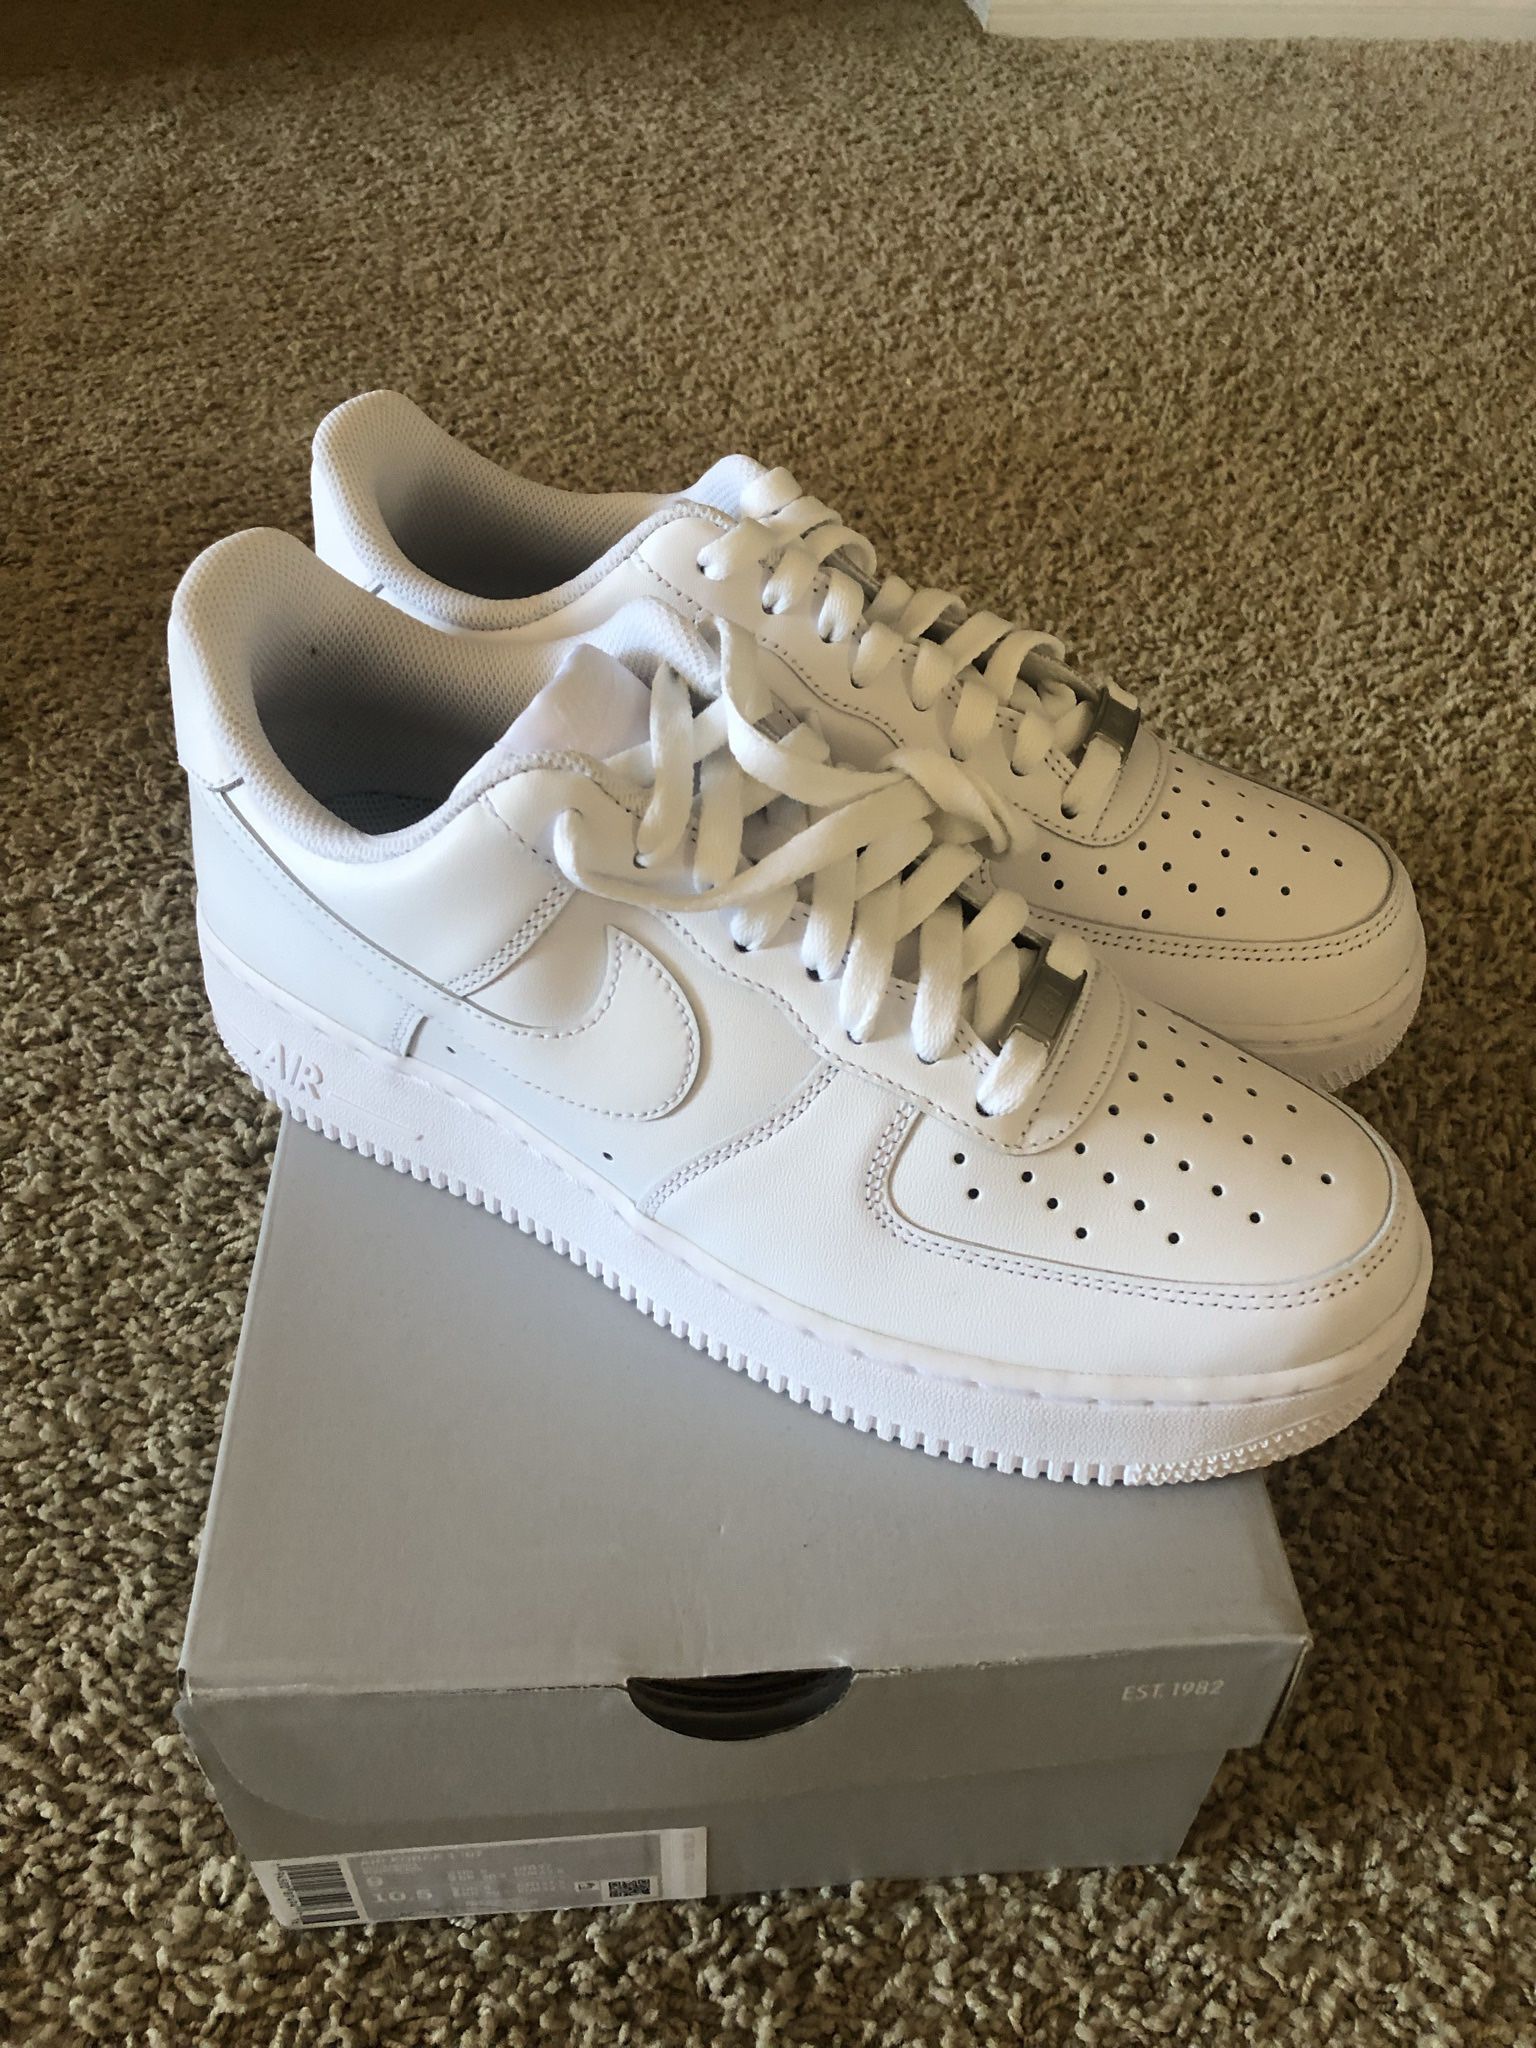 Nike Air Force One Size 9 